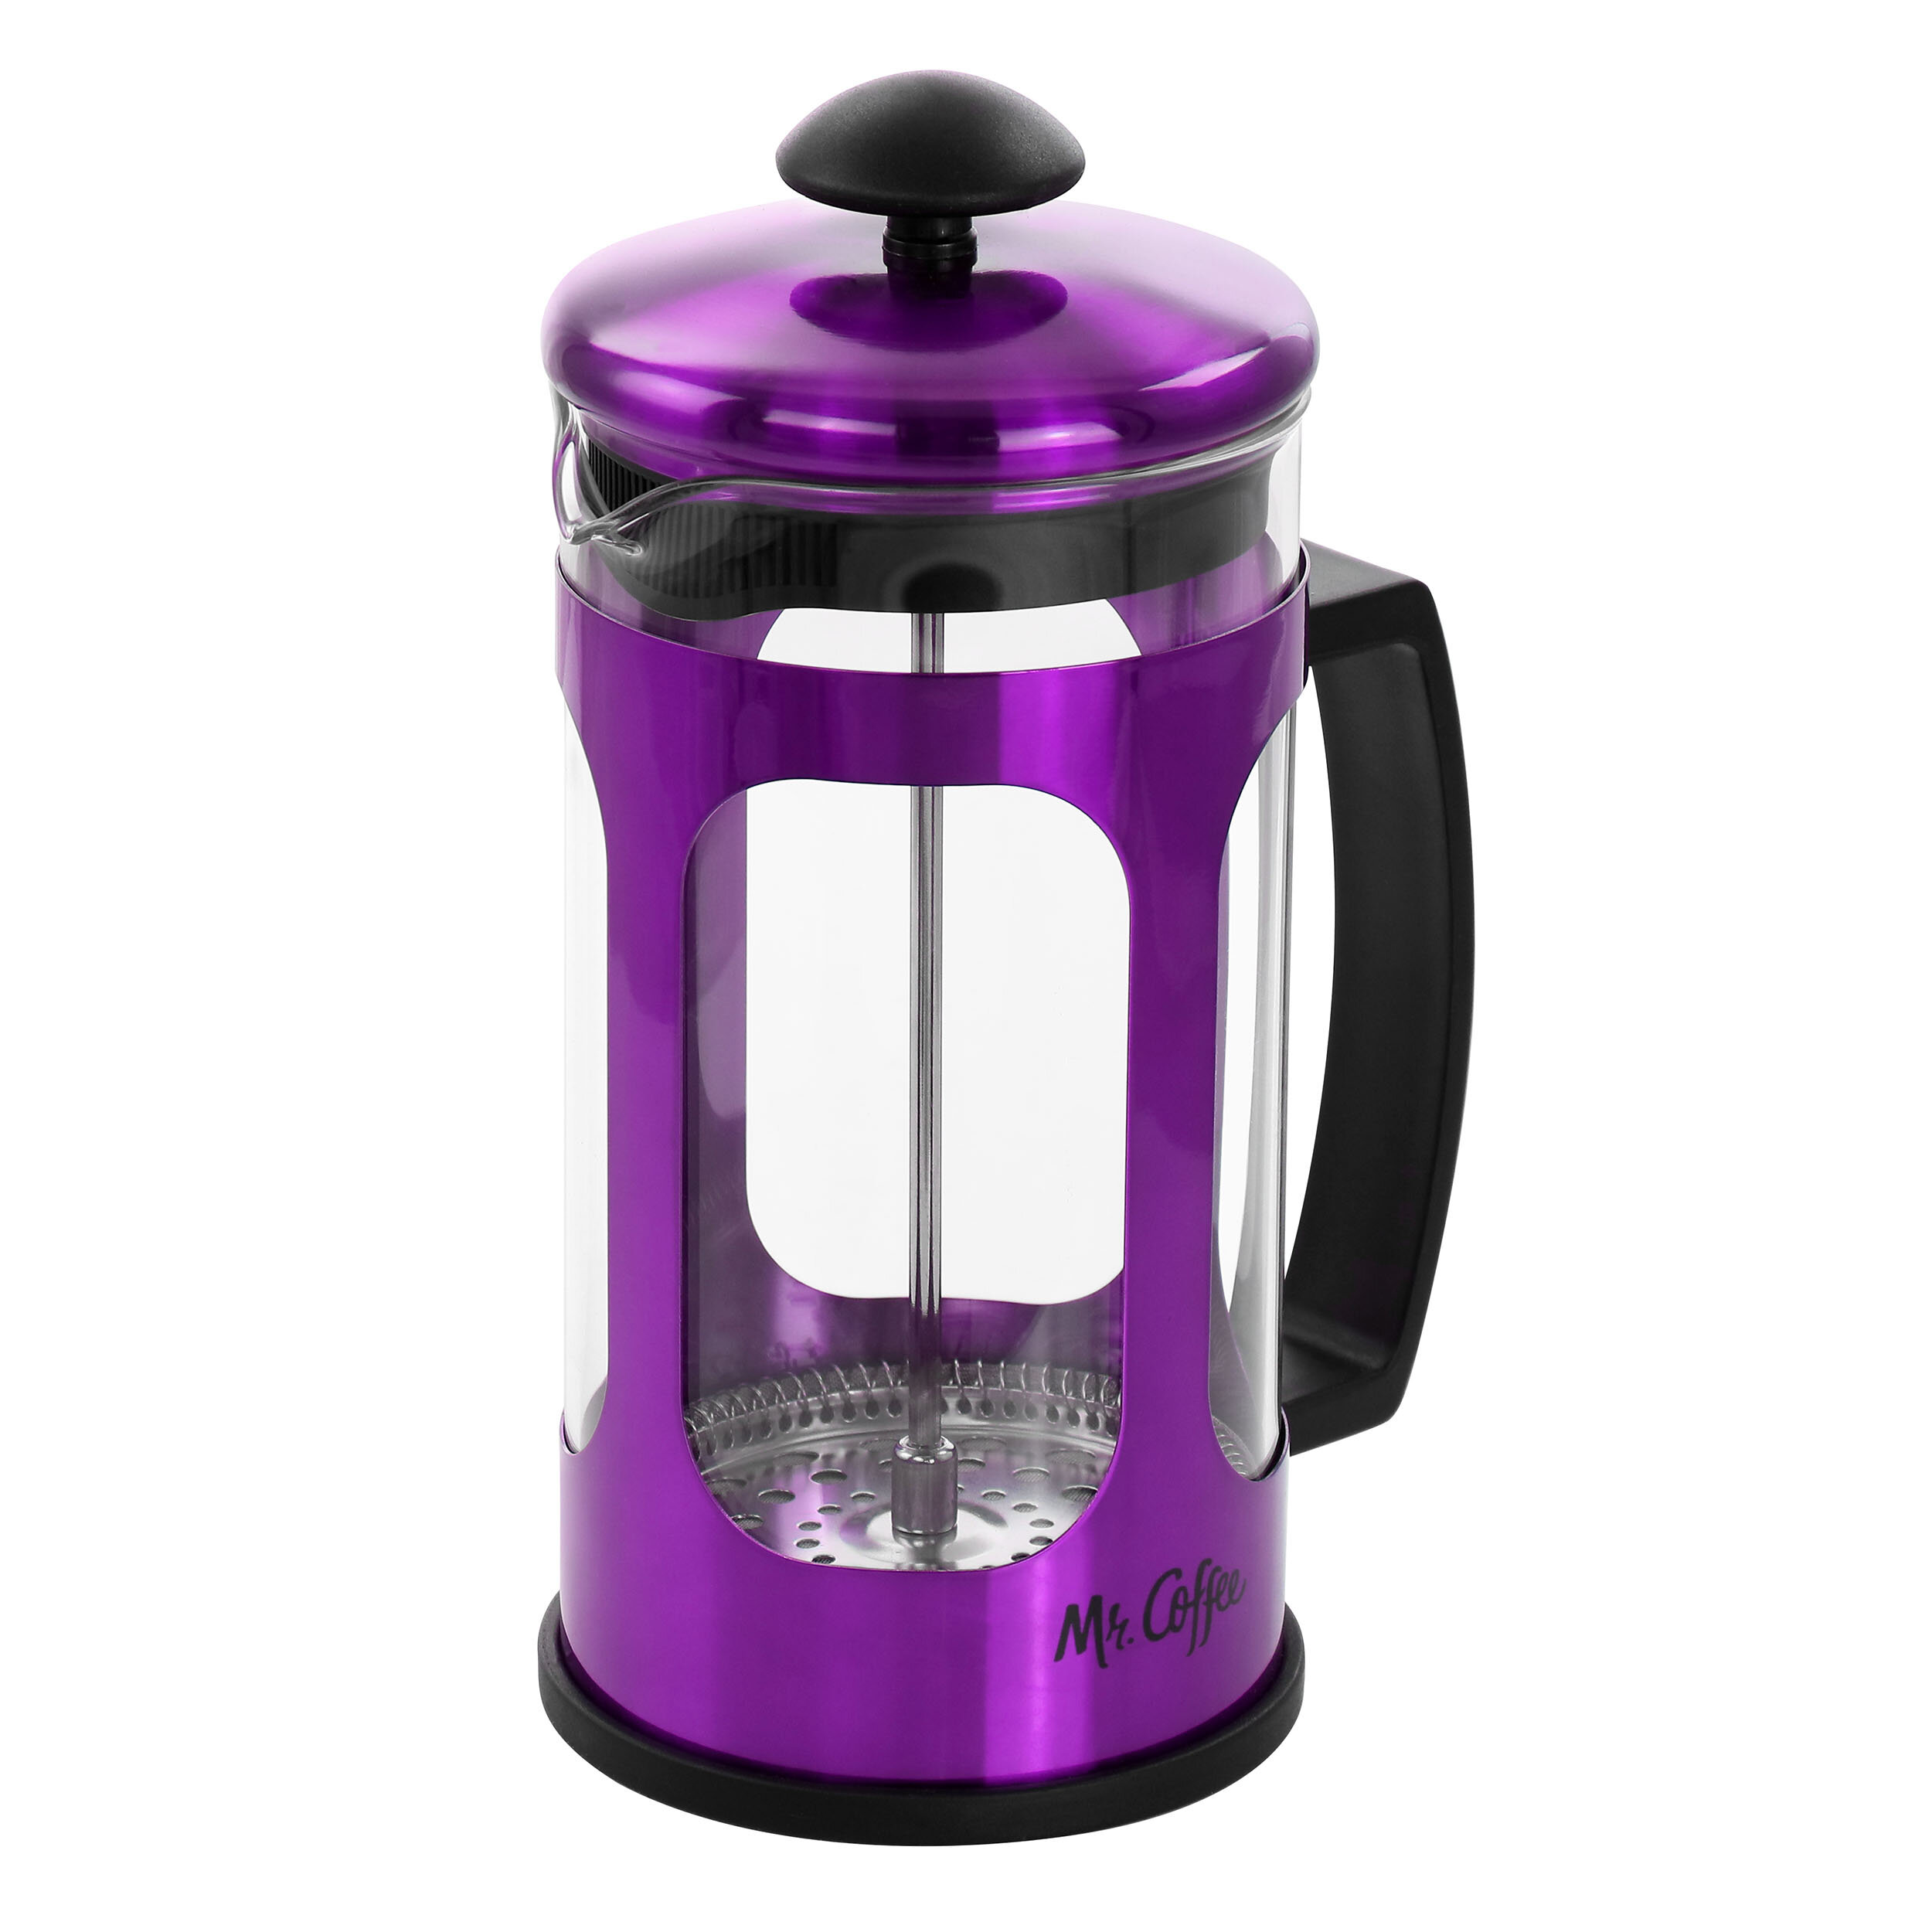 Pinky Up 4.25-Cup French Press Coffee Maker & Reviews